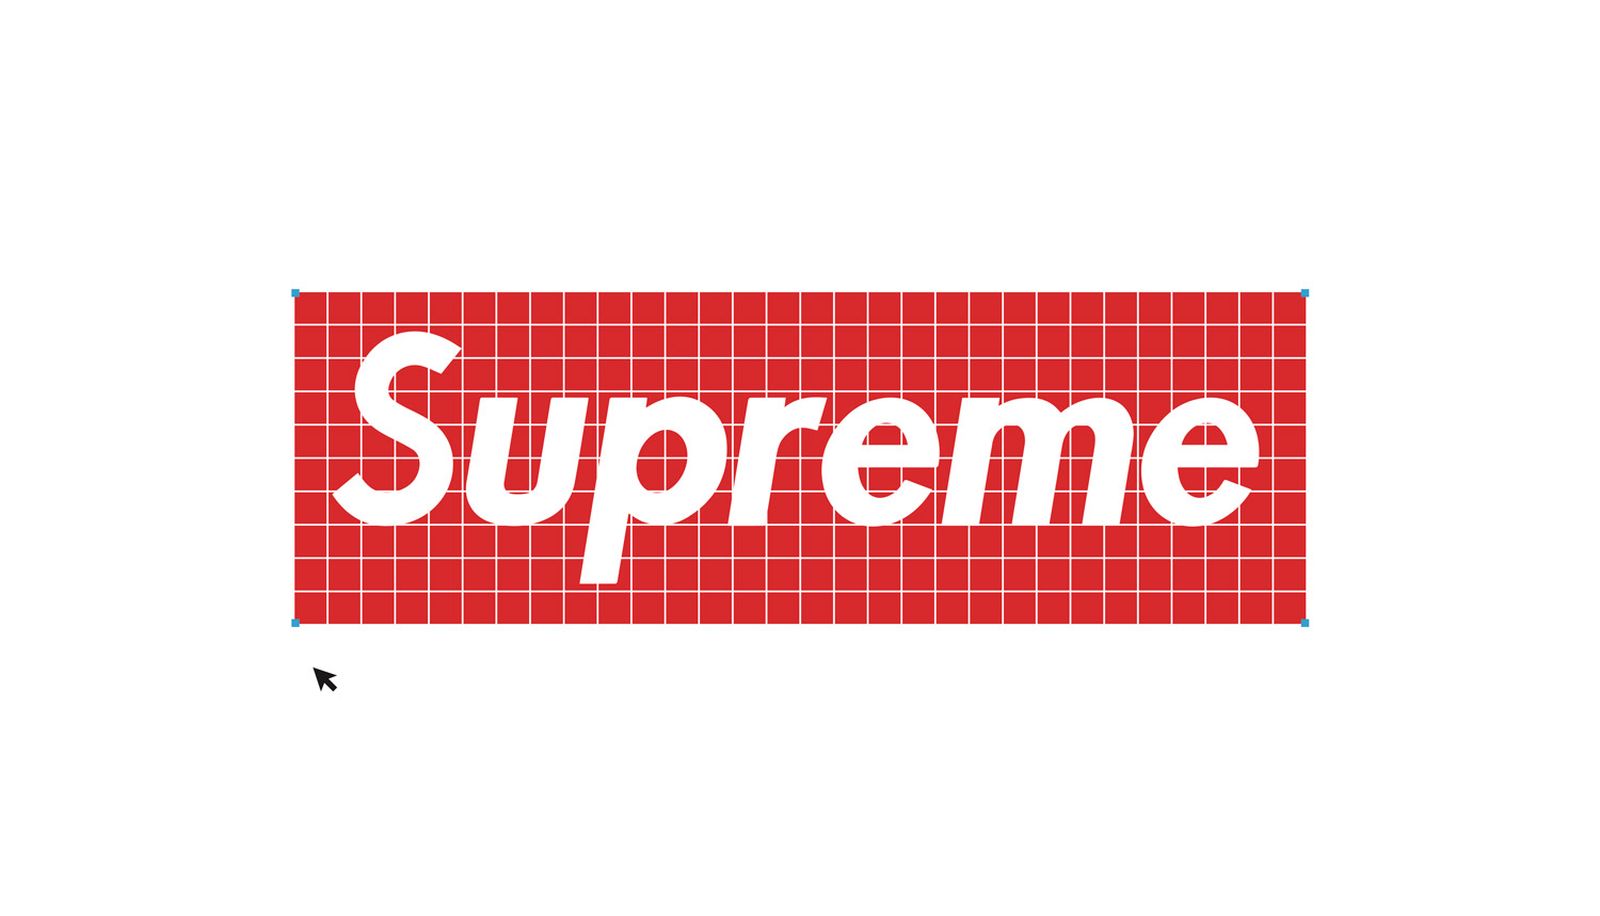 Kosciuszko Restate axe The 20 Most Obscure Supreme Box Logo Tees | Highsnobiety